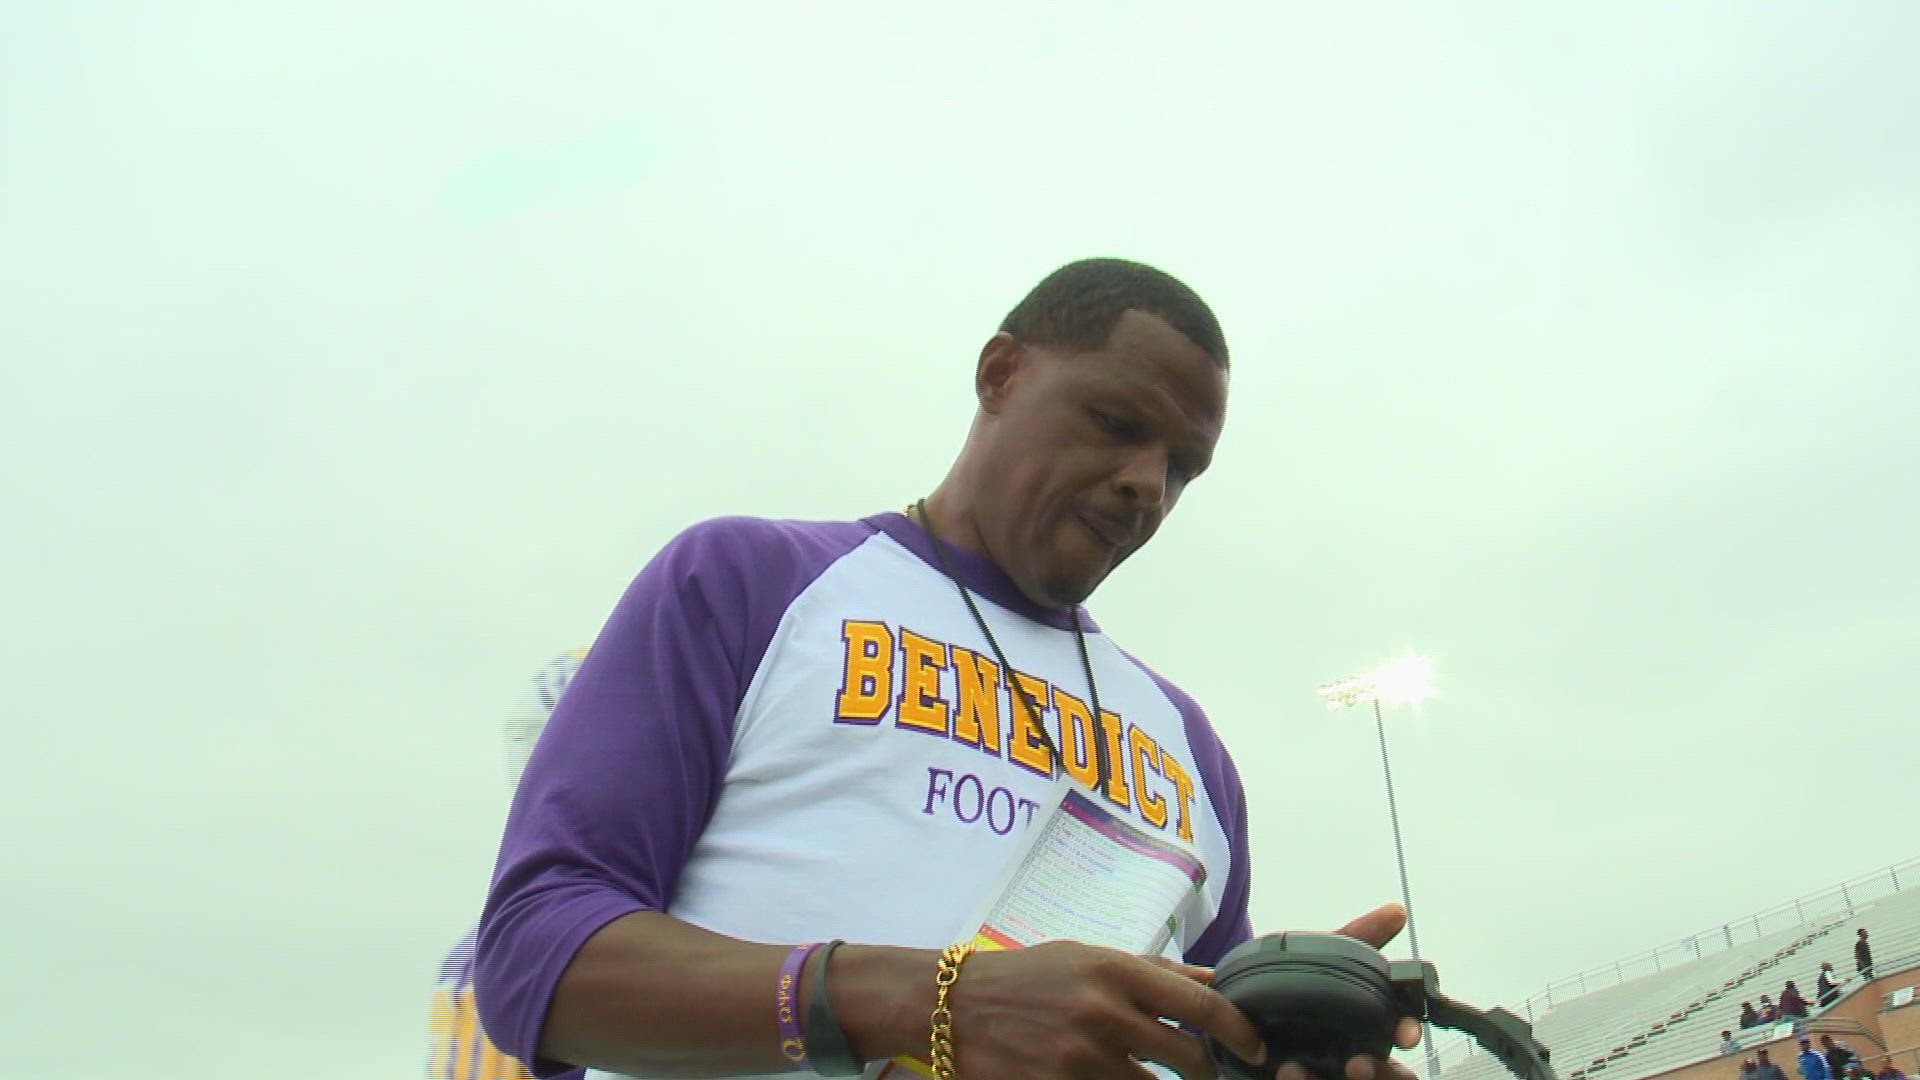 With running back Deondra Duehart breaking through for several monster candidates, Benedict College continues to roll through 2022.